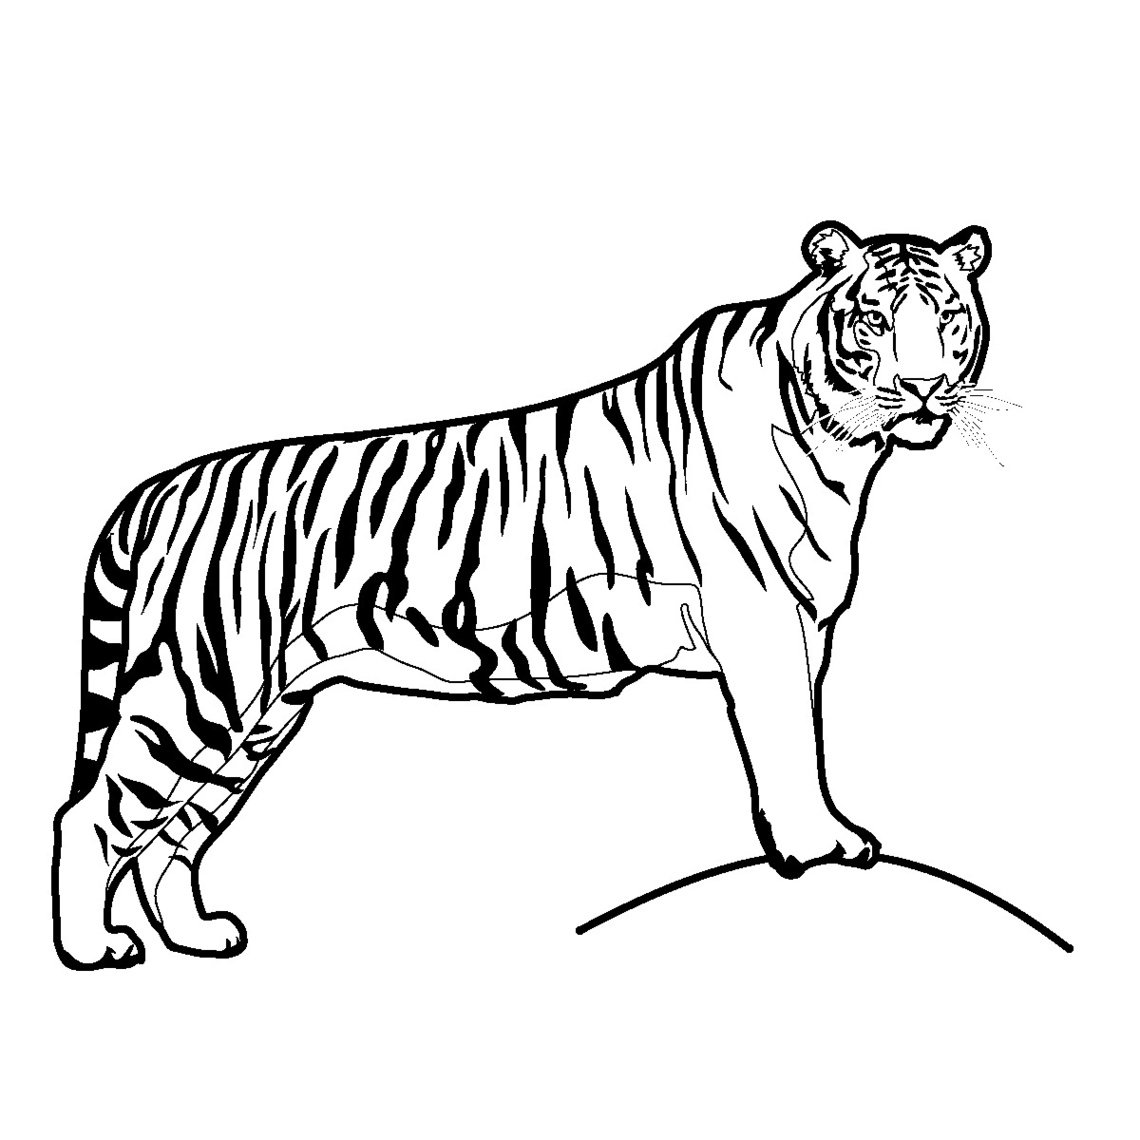 Tigers clipart black and white